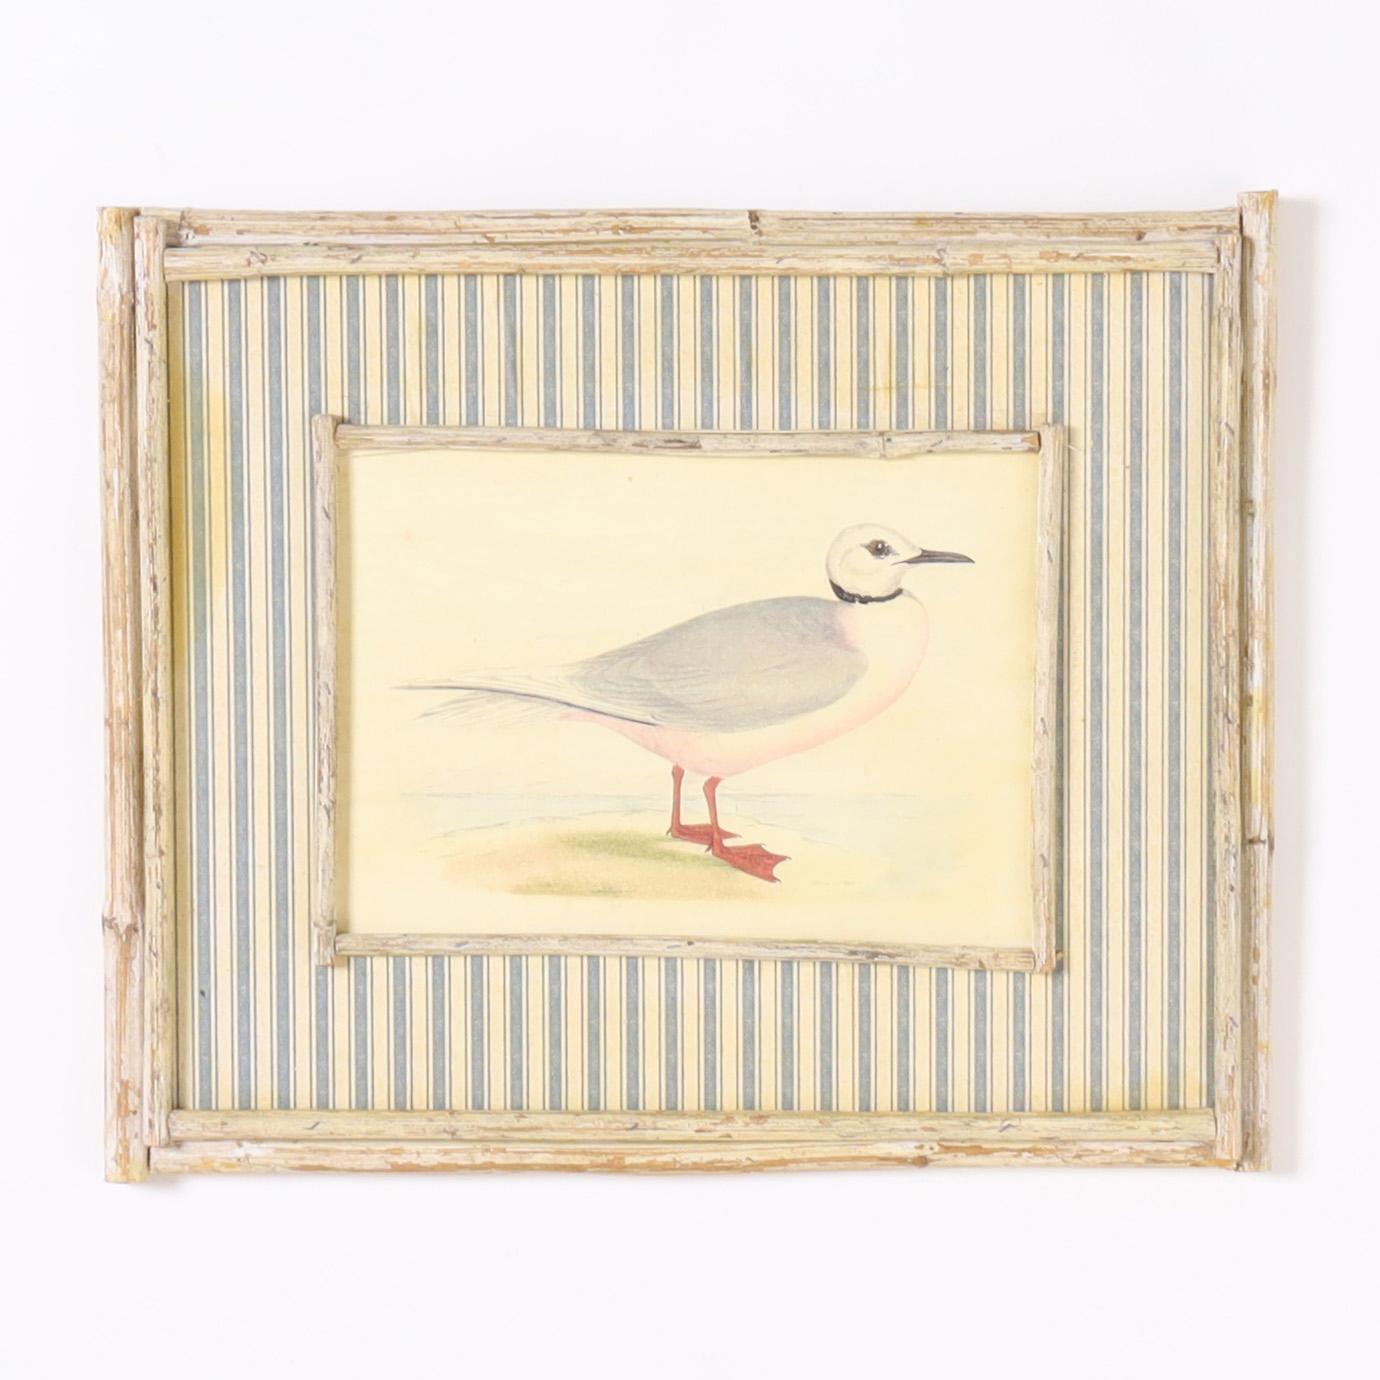 Lofty pair of coastal bird paintings on board executed in gouache and watercolor and presented in handmade white washed reed frames with faux ticking mats.